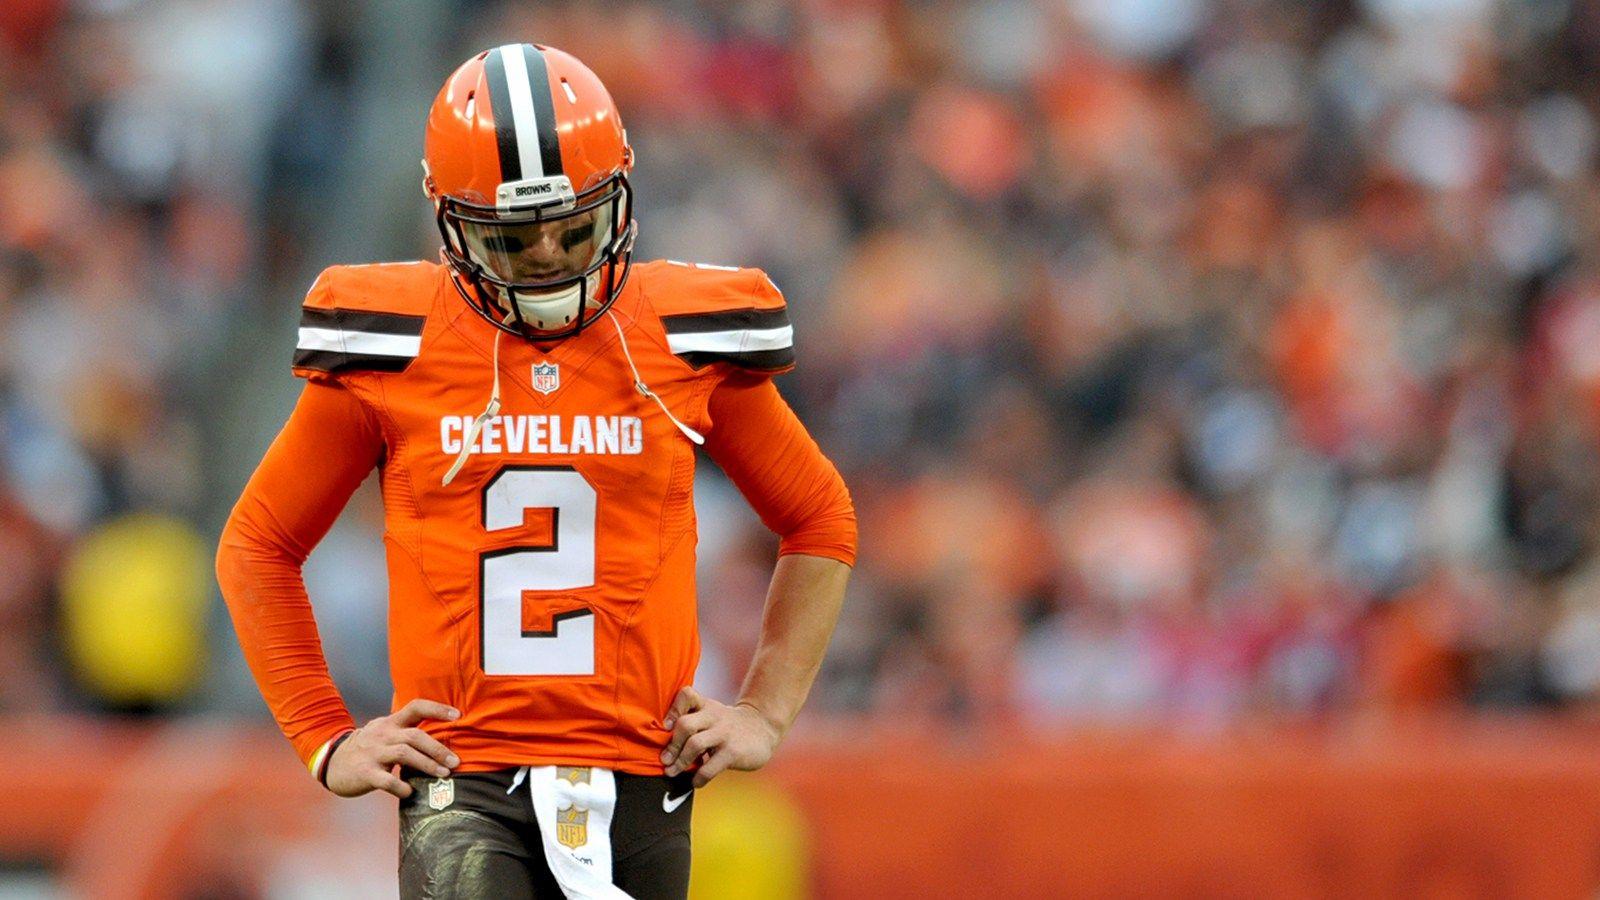 Johnny Manziel says the Browns should've known he didn't know his